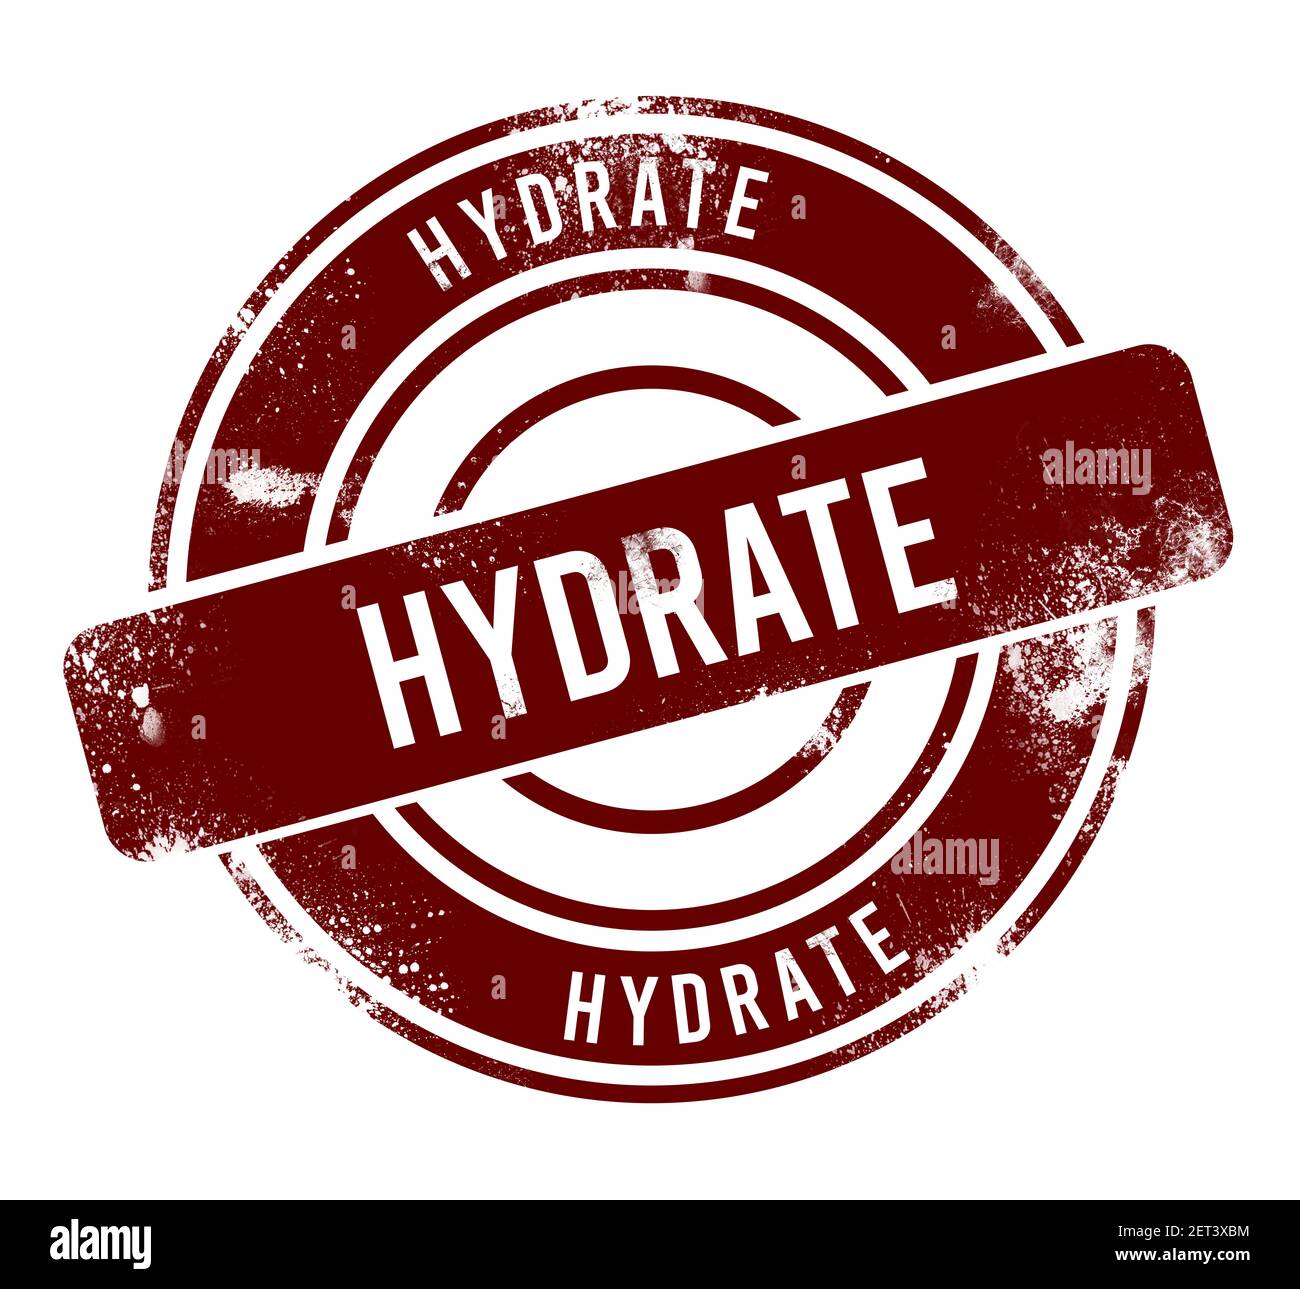 hydrate - bouton rond rouge grunge, tampon Banque D'Images